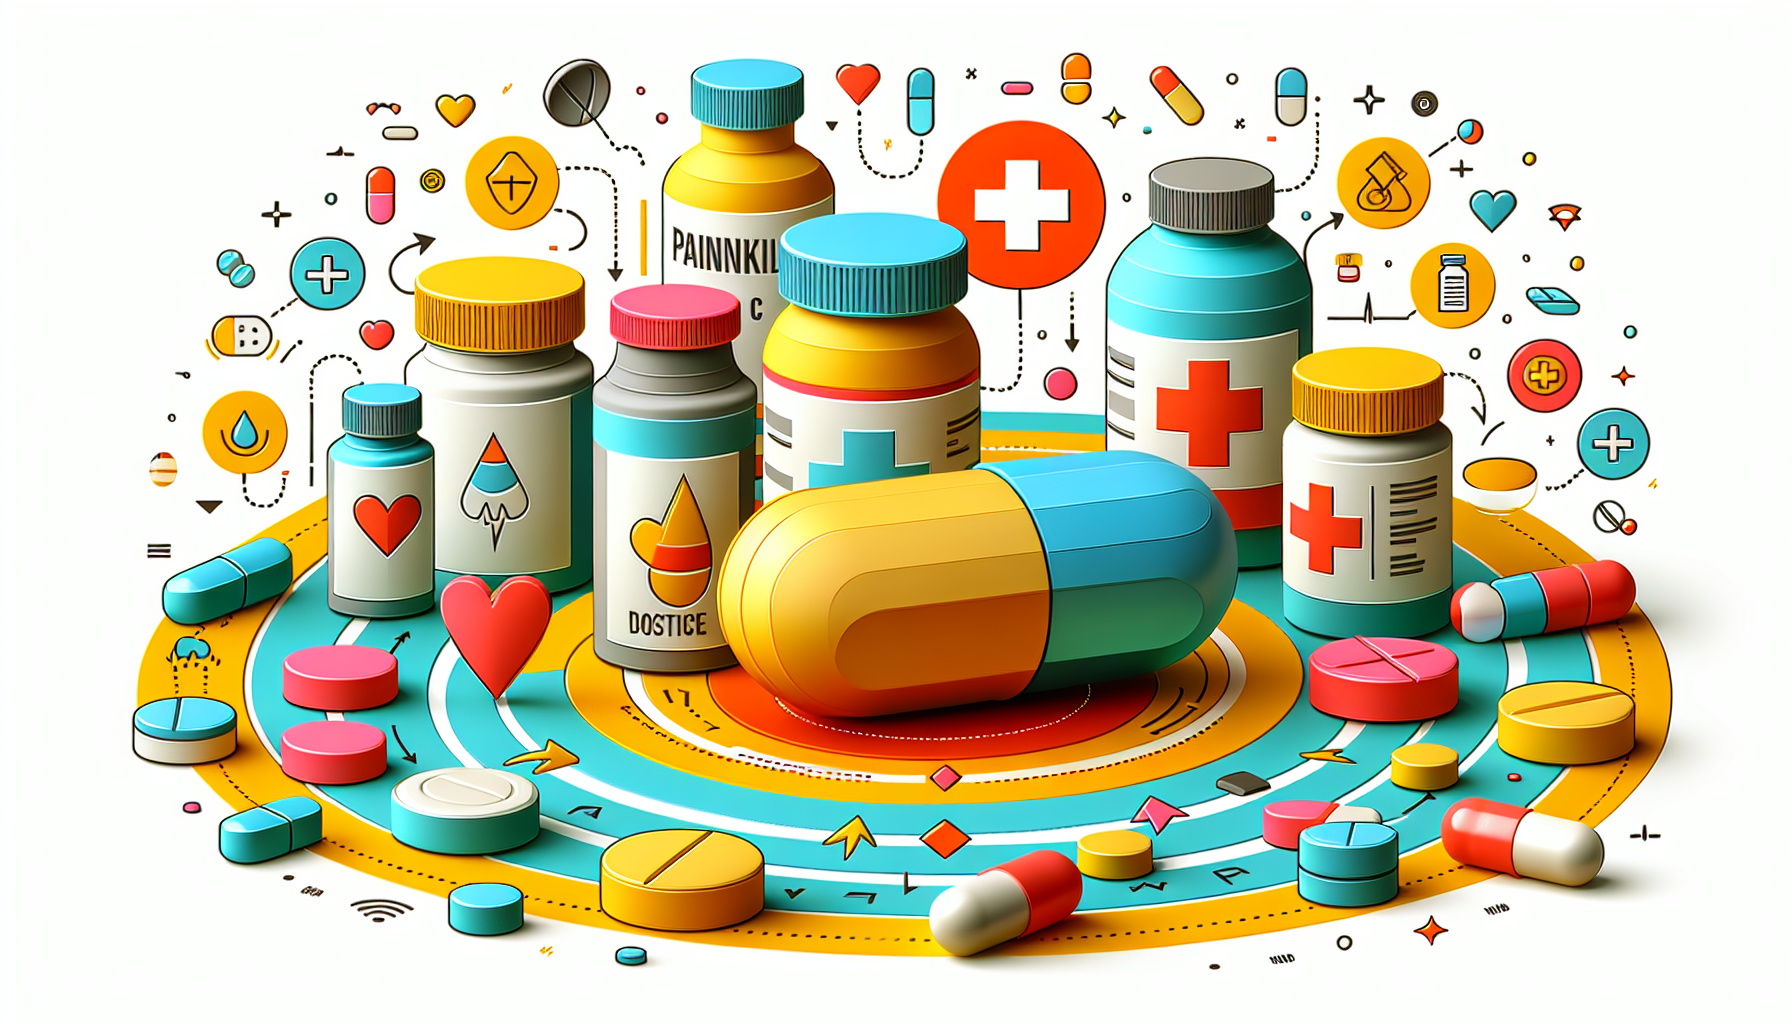 Safe usage and dosage guidelines for painkillers